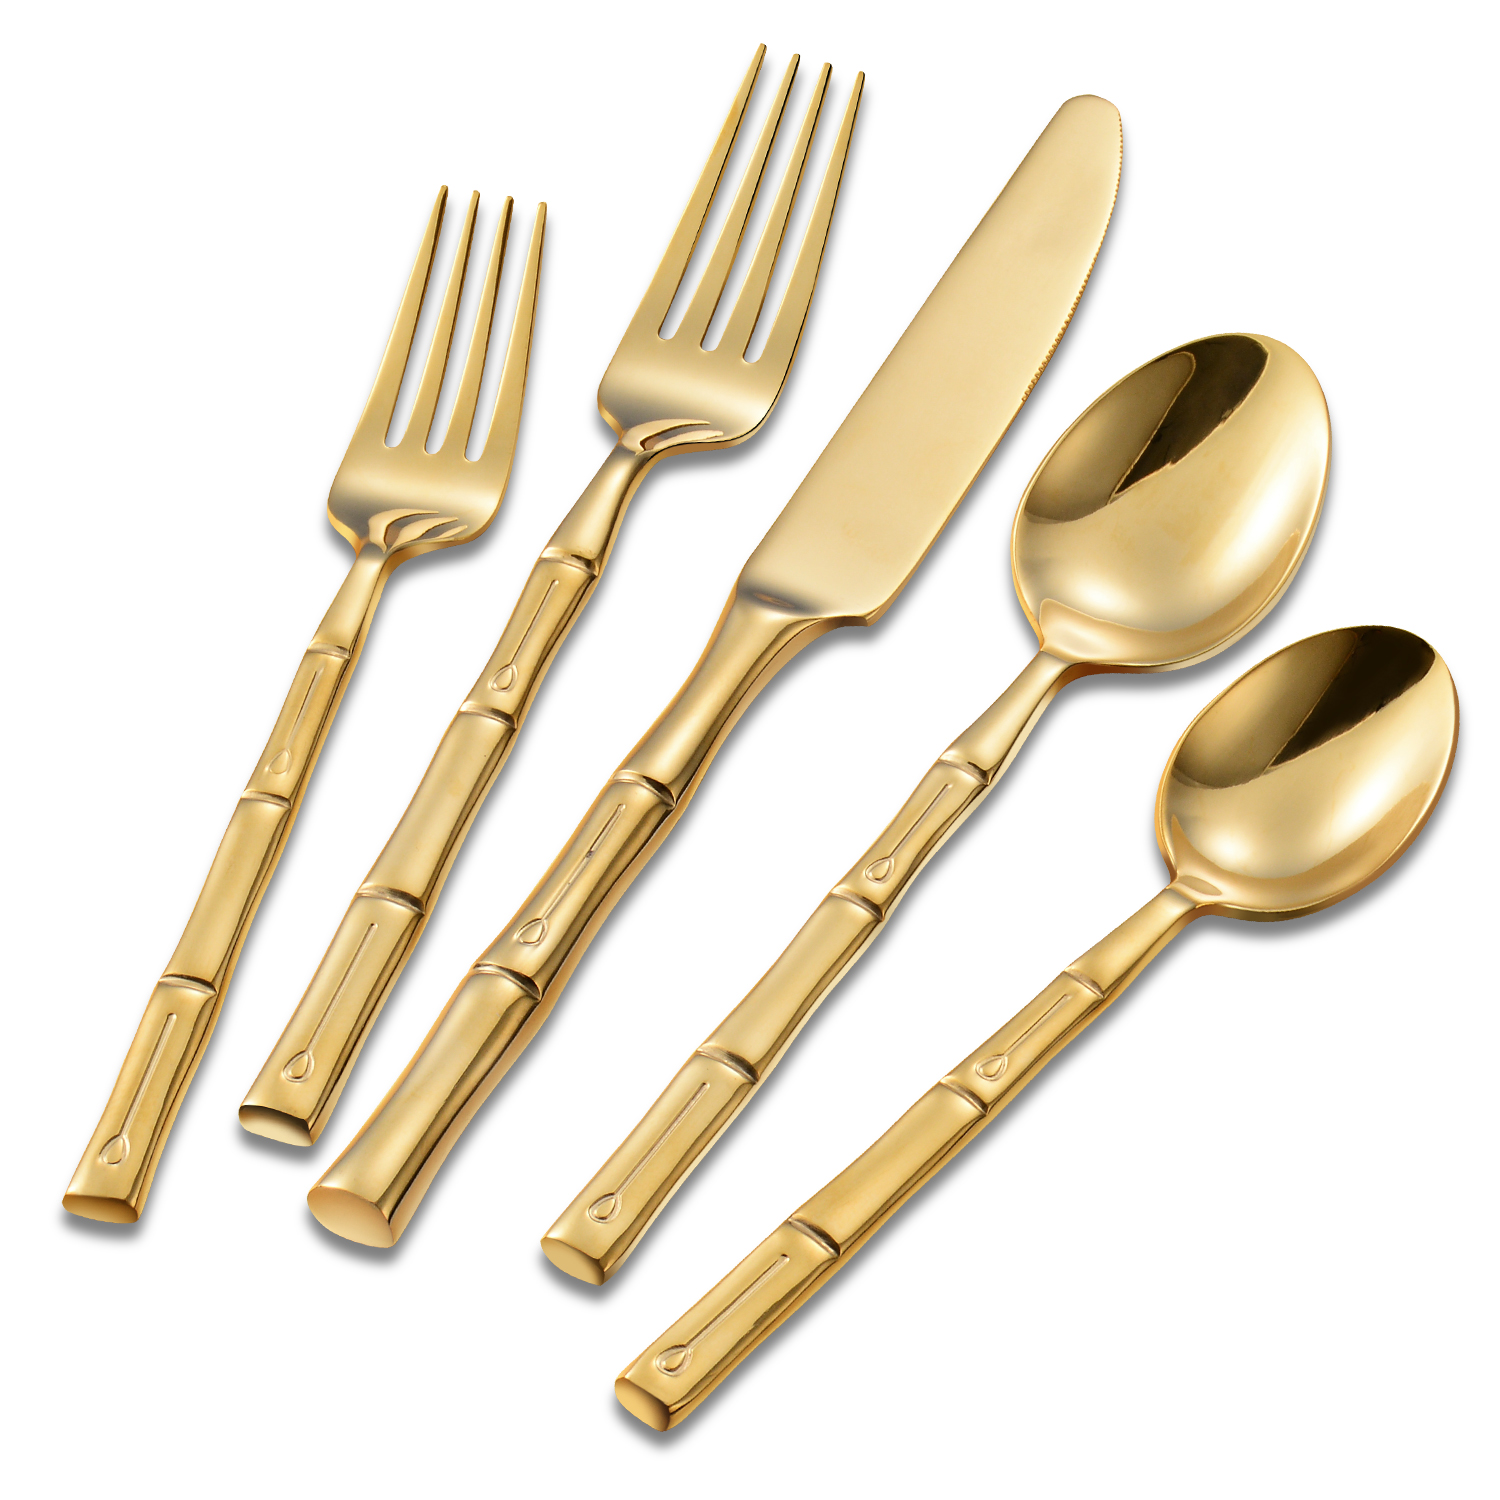 OEM/ODM Supplier 20 Piece Flatware Set - Gold Bamboo Shaped Handle Stainless Steel Cutlery Set – Liou